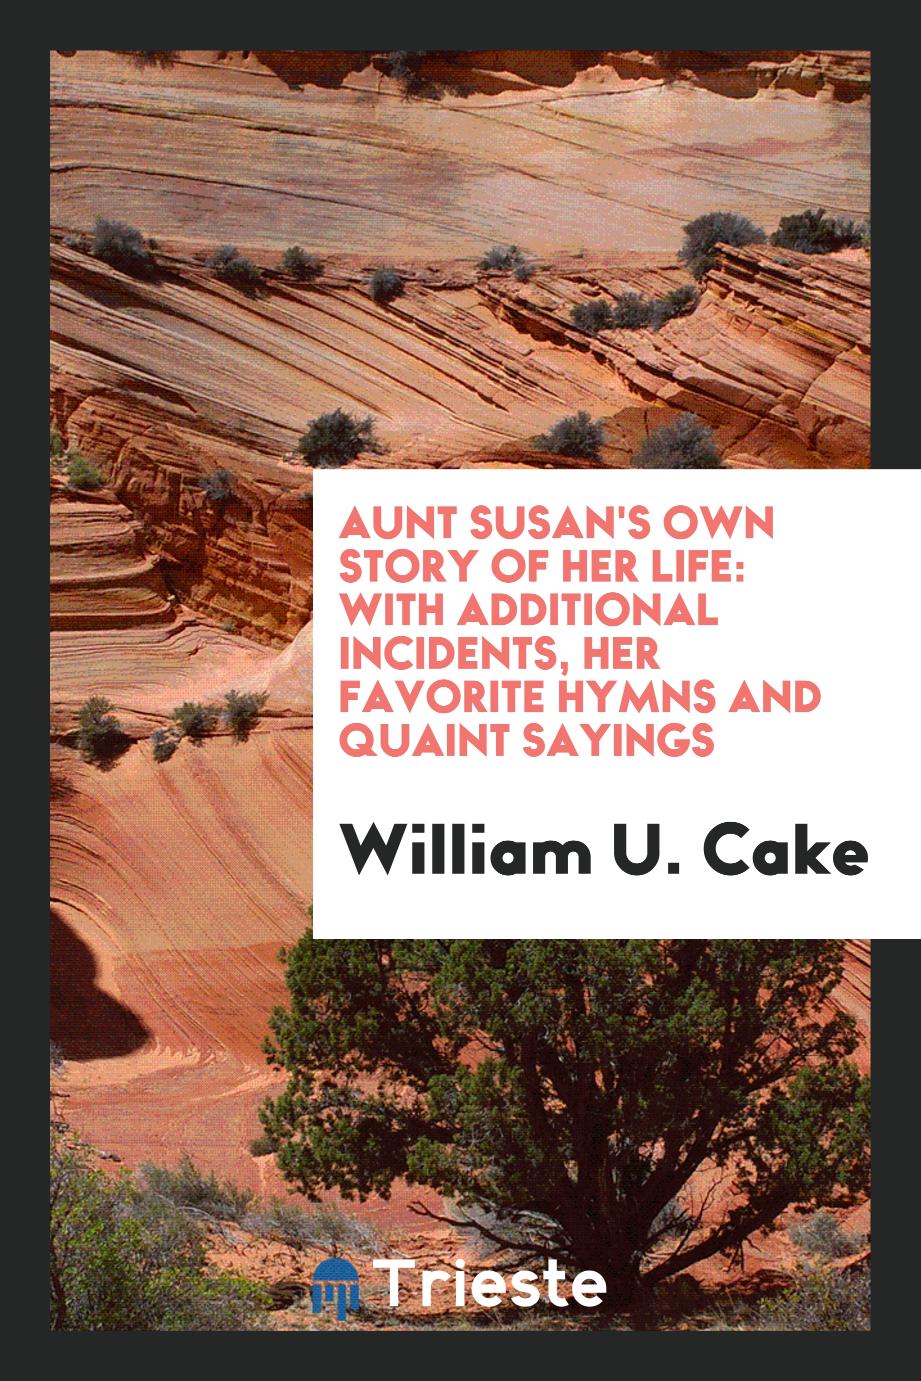 Aunt Susan's Own Story of Her Life: With Additional Incidents, Her Favorite hymns and quaint sayings